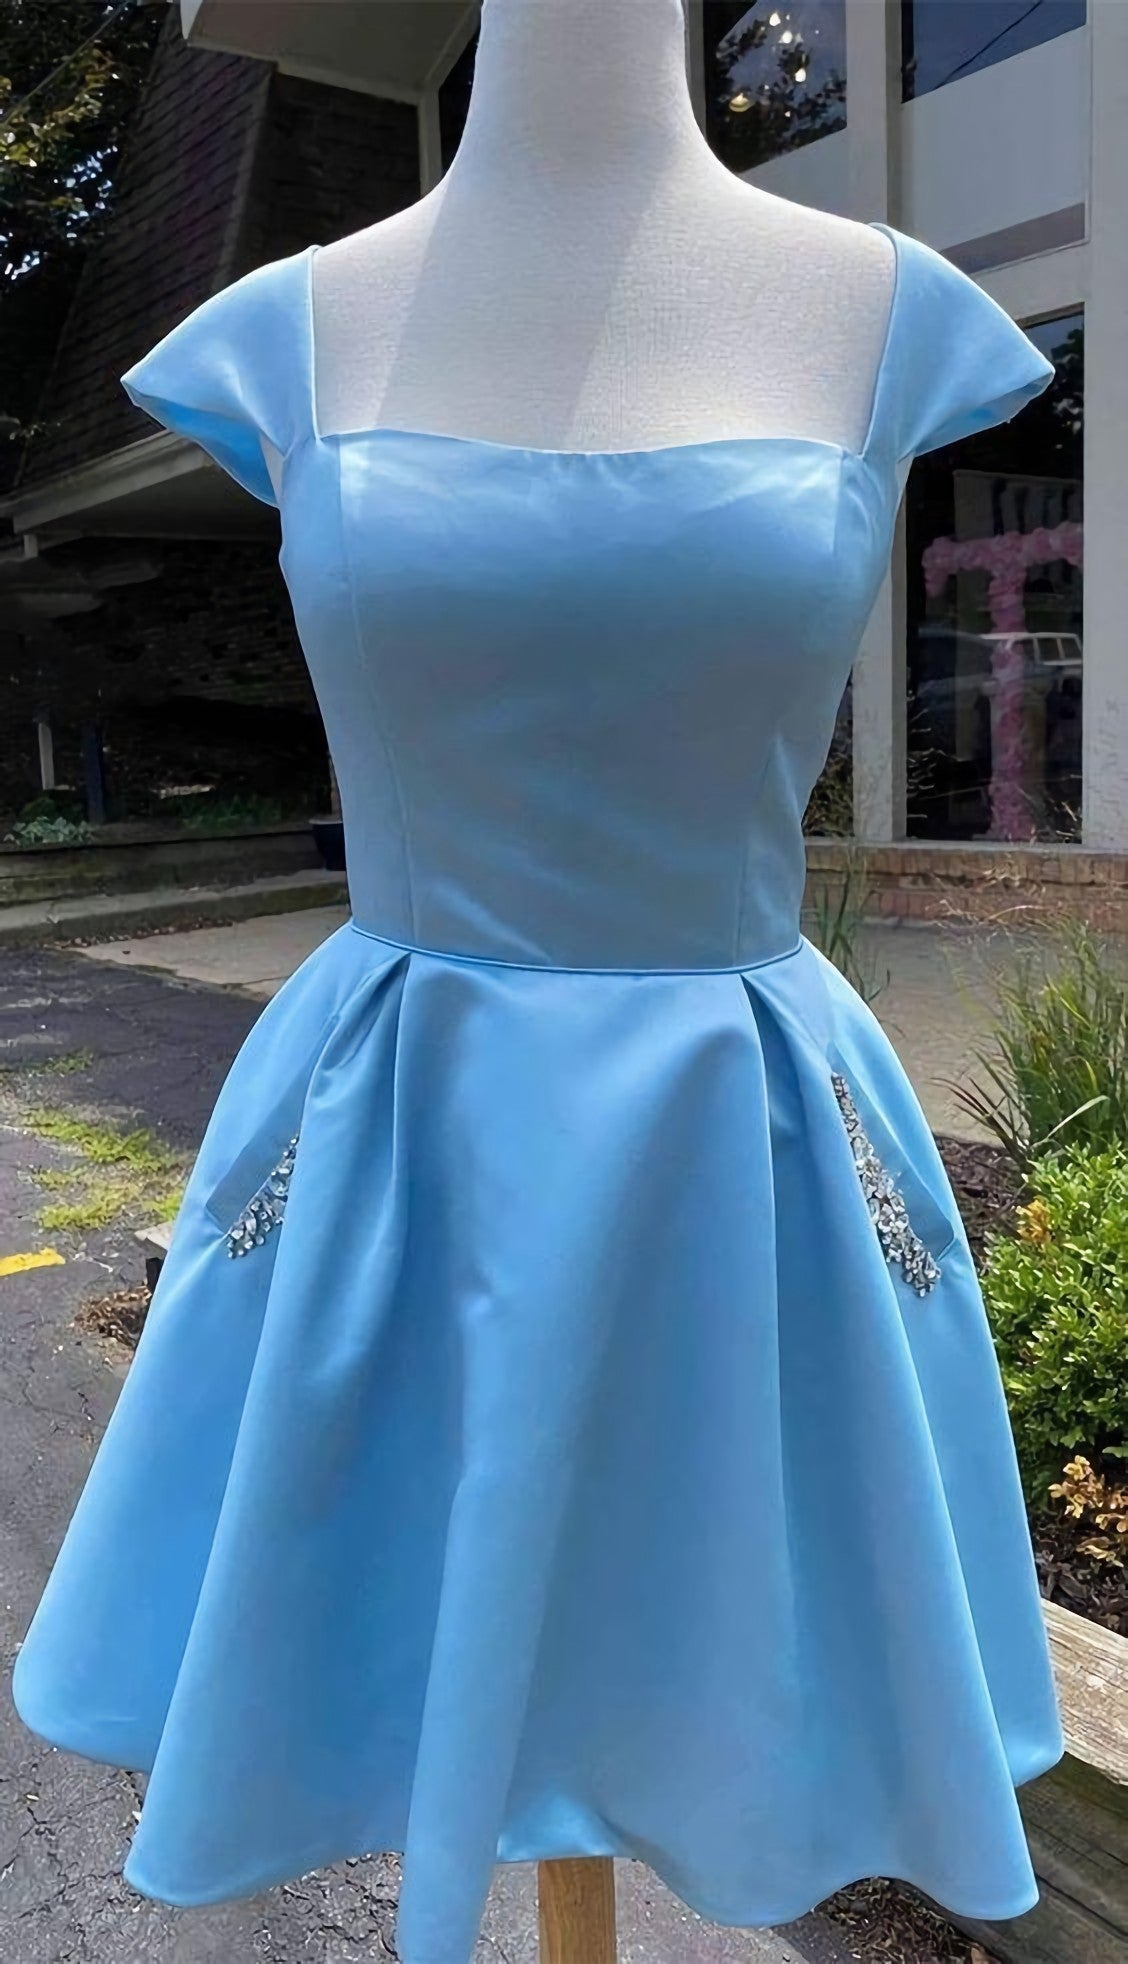 Cap Sleeves Light Blue Satin Short Corset Homecoming Dress, With Beaded Bodice outfit, Prom Dresses Sweetheart